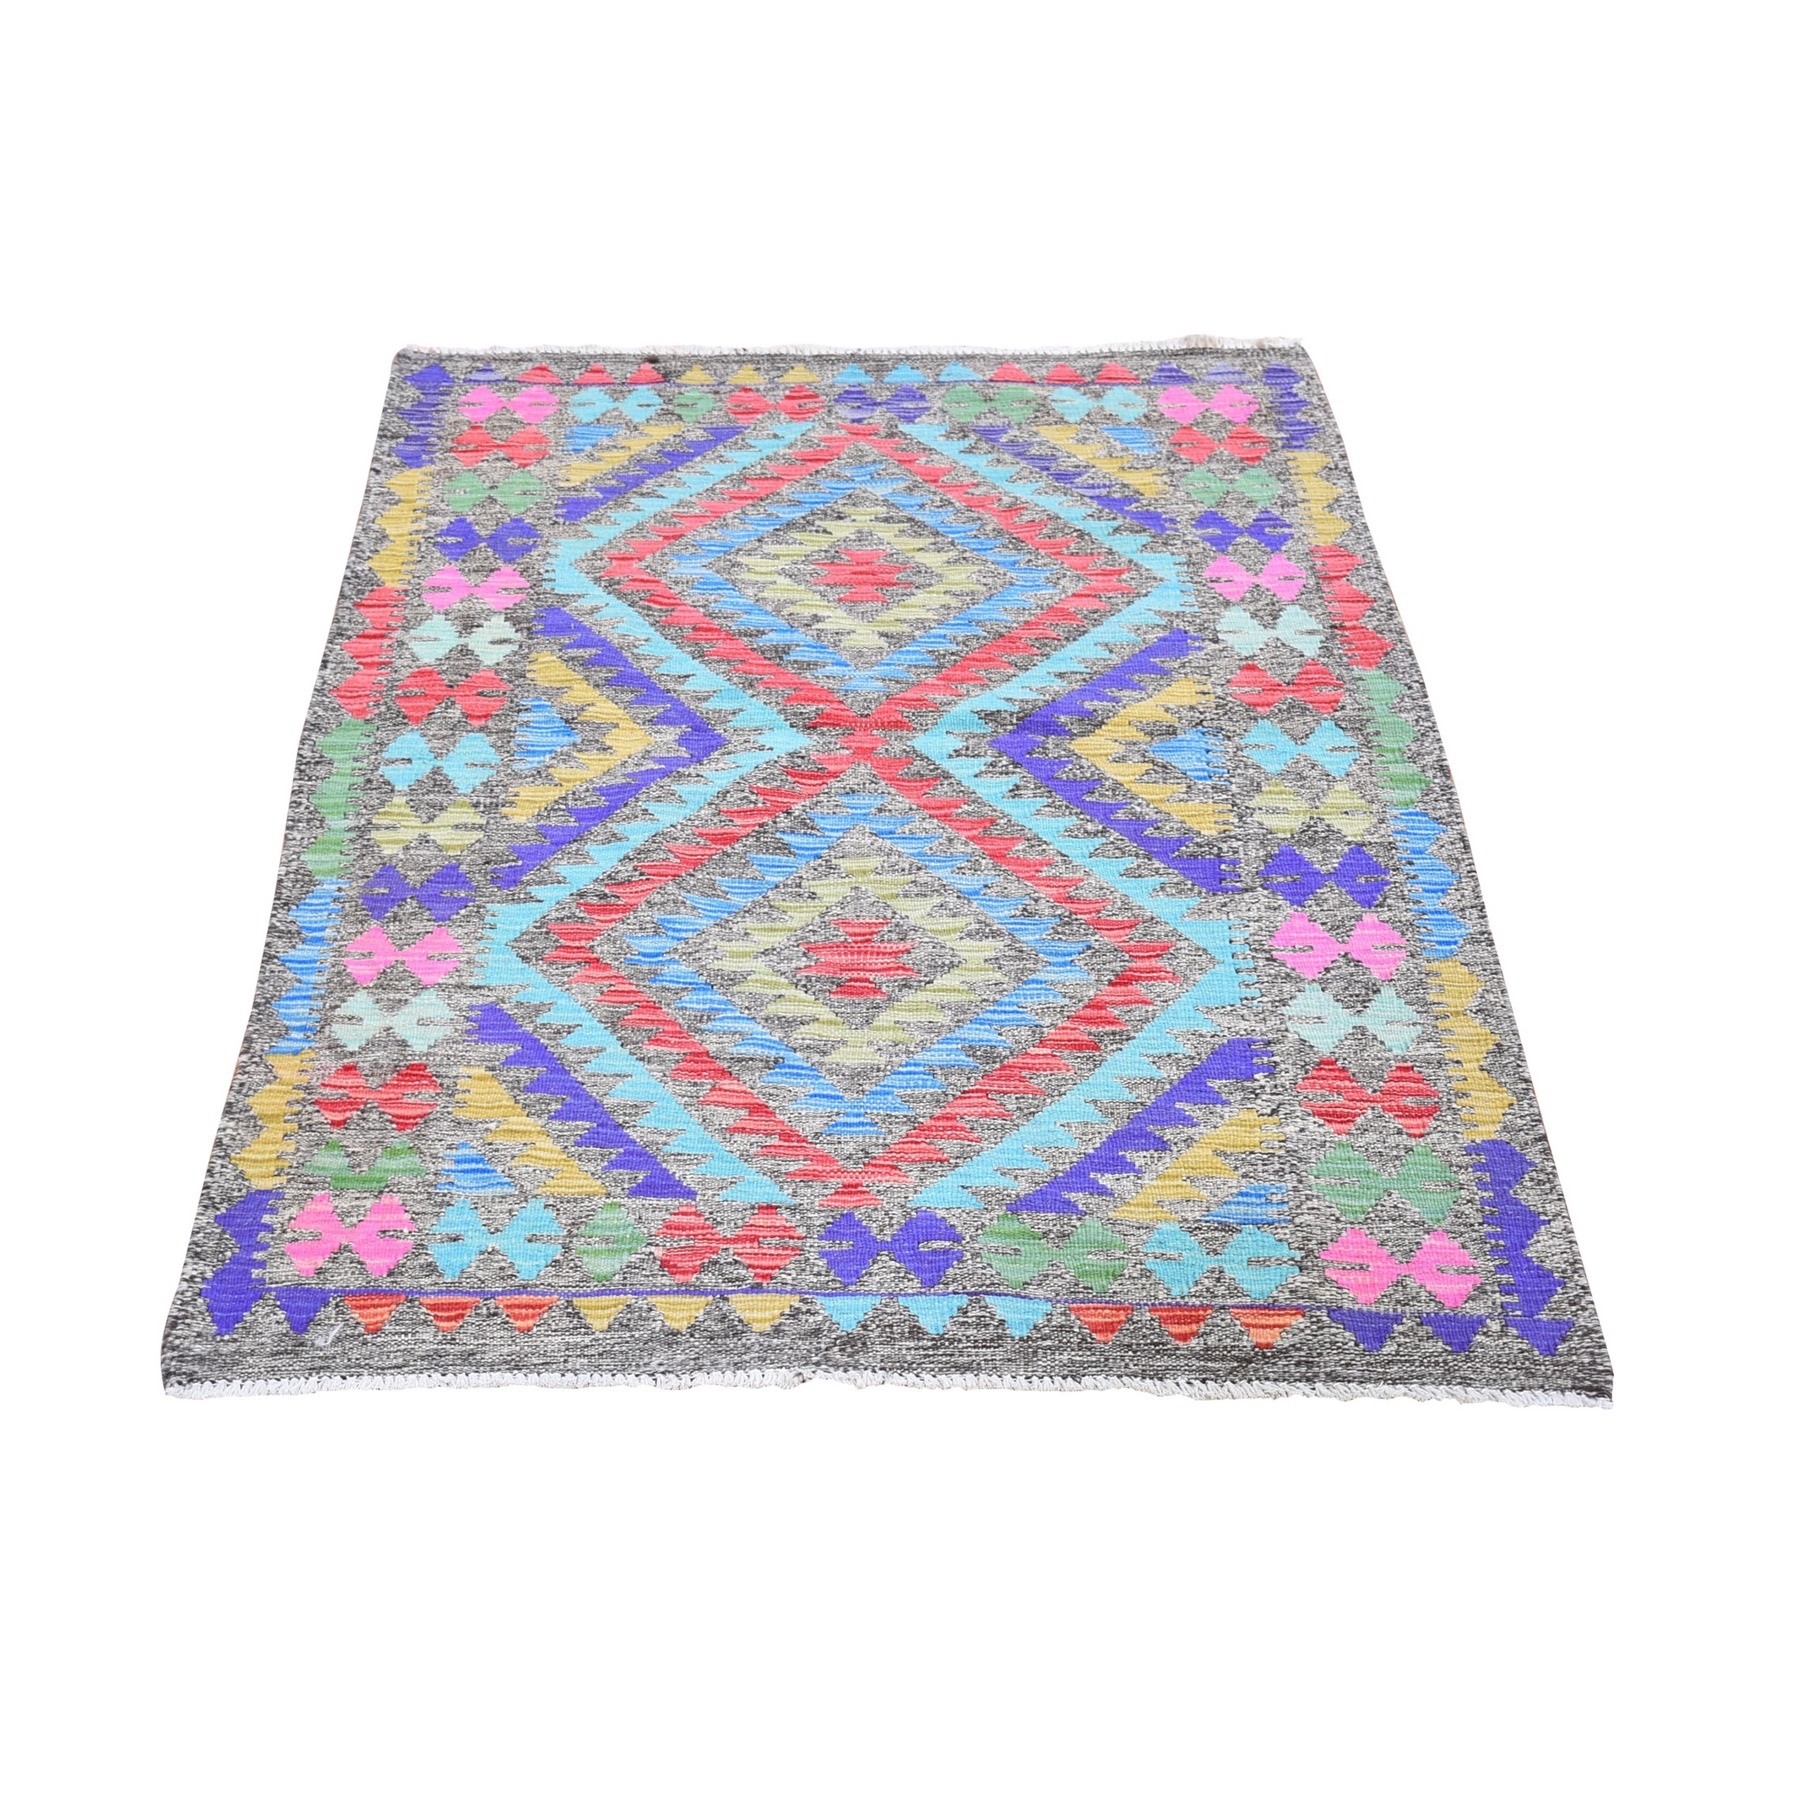 Traditional Wool Hand-Woven Area Rug 3'3